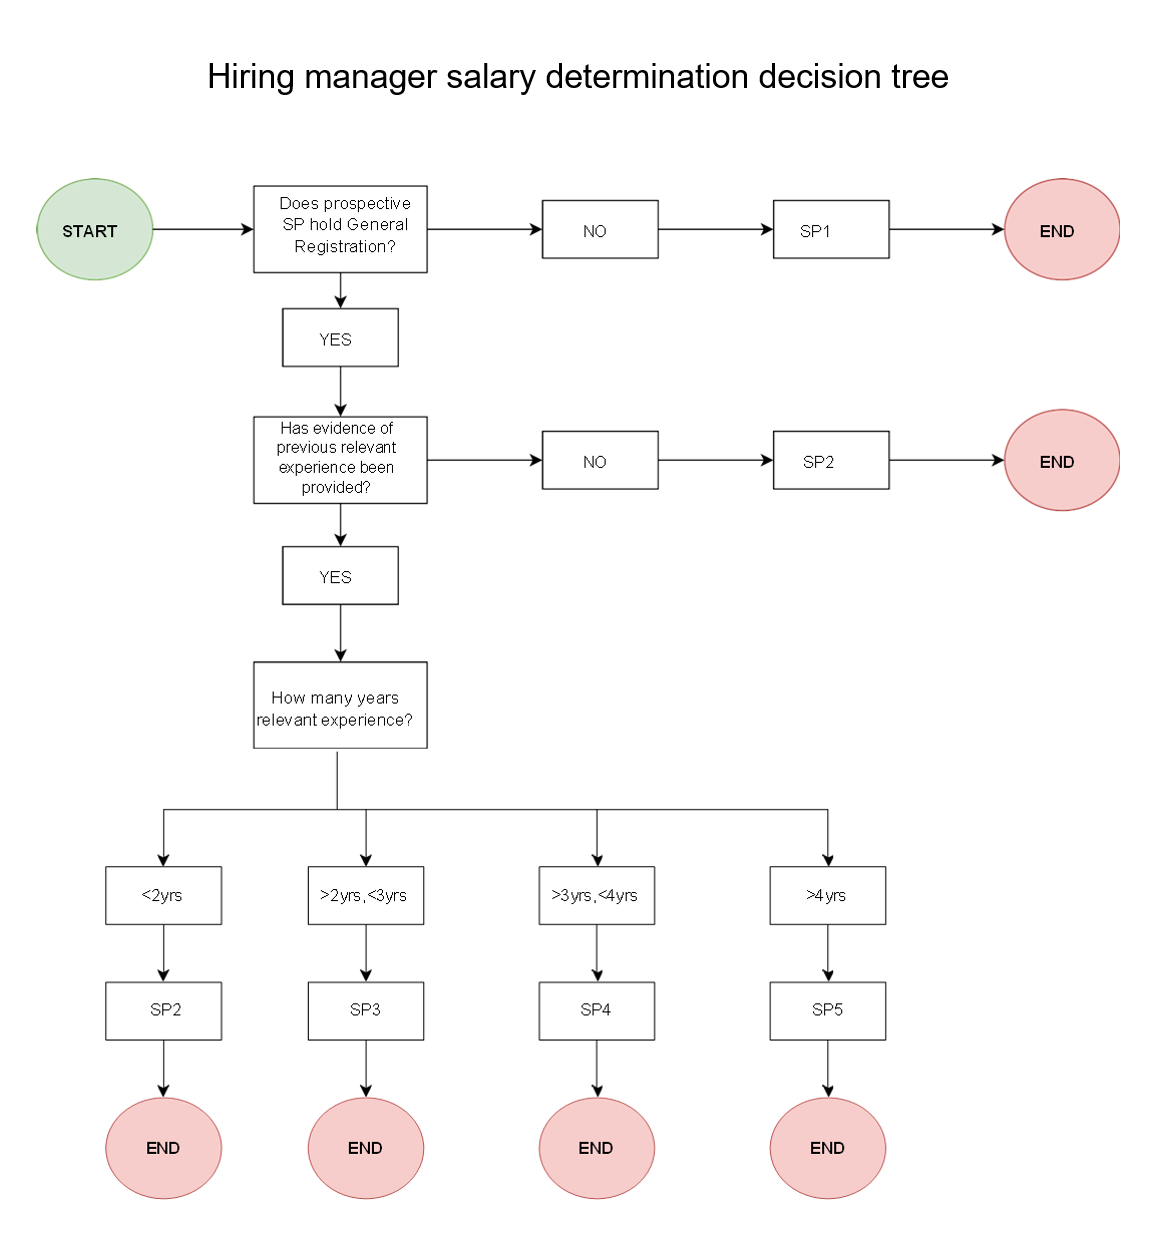 Hiring manager salary determination decision tree graph. Start. Does prospective SP hold general registration. If no, SP1. If yes, has evidence of previous relevant experience been provided. If no, SP2. If yes, how many years relevant experience. Less than 2 years, SP2. If more than 2 years, less than 3 years, SP3. If more than 3 years, less than 4 years, SP4. If more than 4 years, SP5.